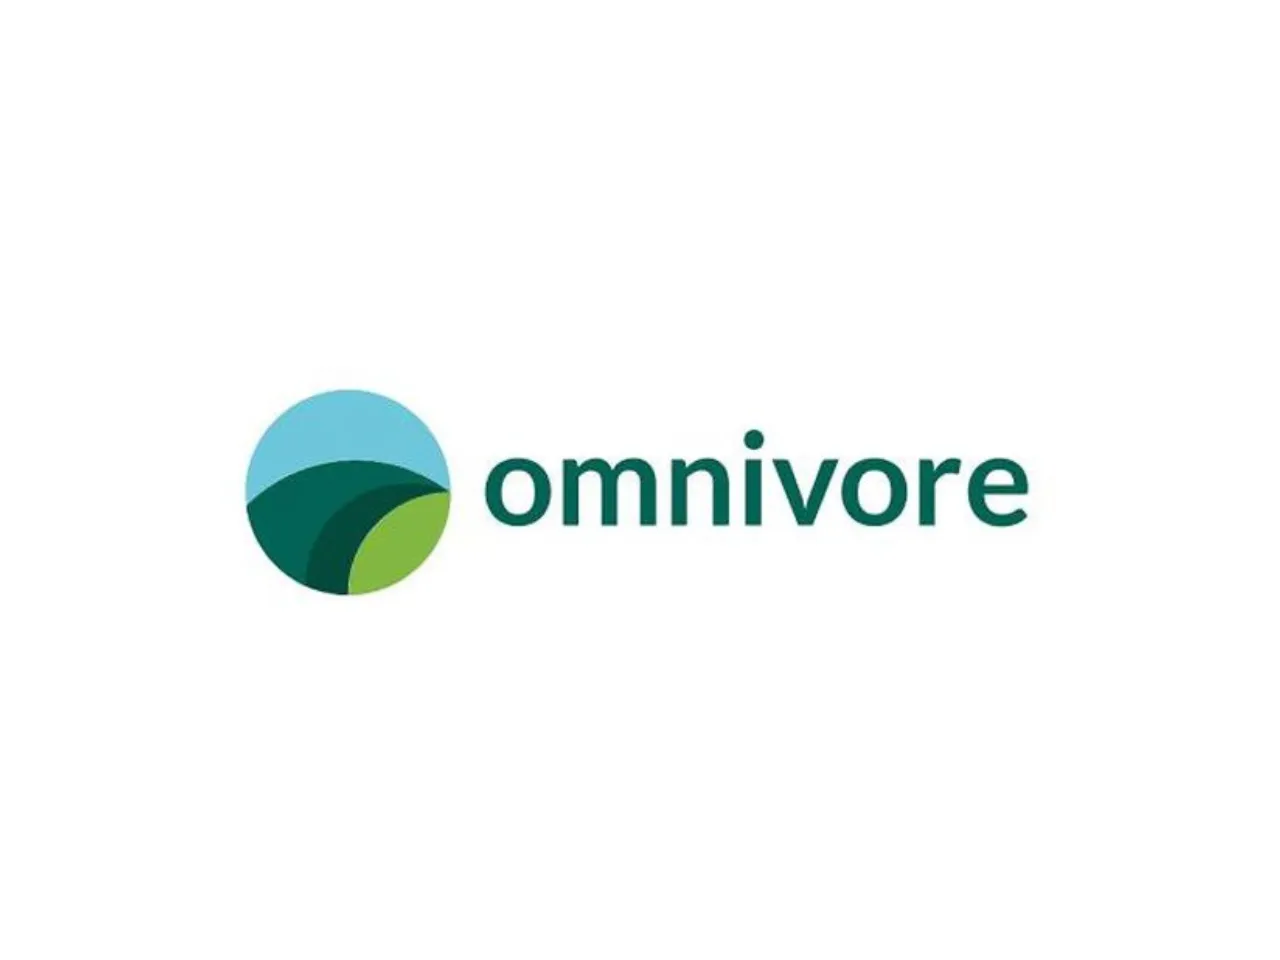 Omnivore Secures $150M in First Close of Third Fund, Accelerating Investments in Agri-tech Startups